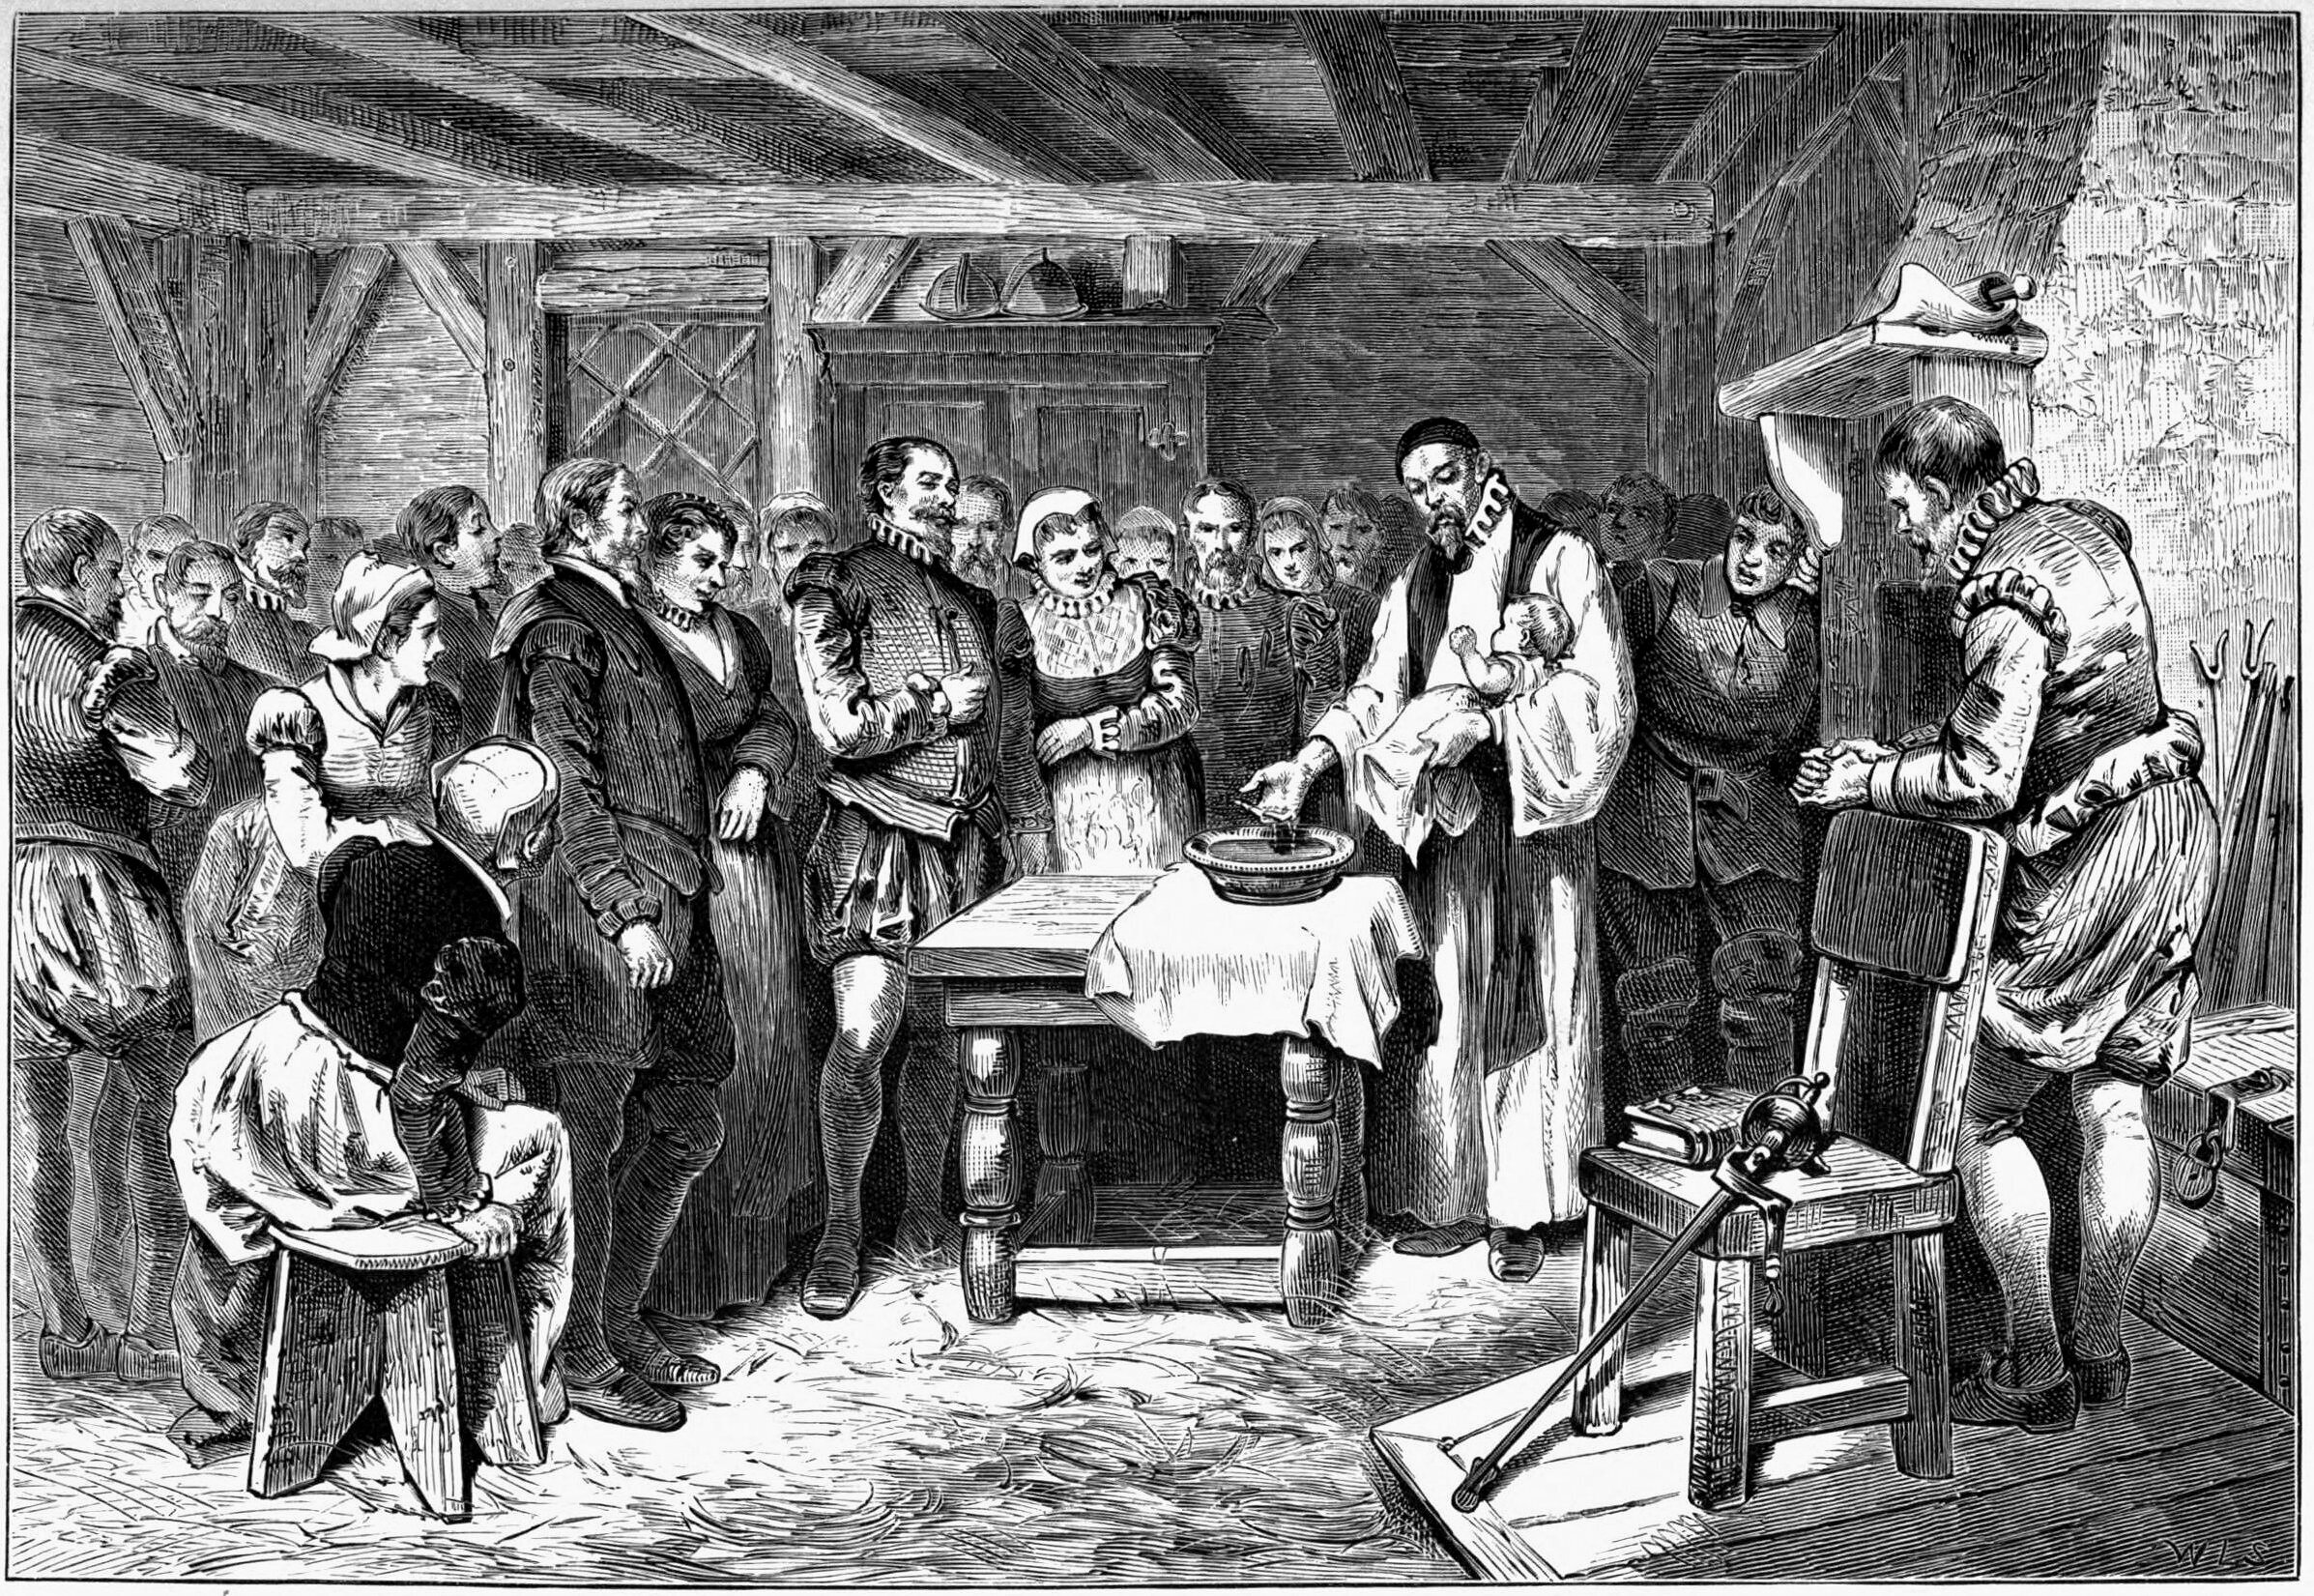   Baptism of Virginia Dare , 1880, wood engraving by  William Ludwell Sheppard &nbsp;-&nbsp;William A. Crafts (1876)&nbsp;  Pioneers in the settlement of America: from Florida in 1510 to California in 1849  ,&nbsp; Boston : 